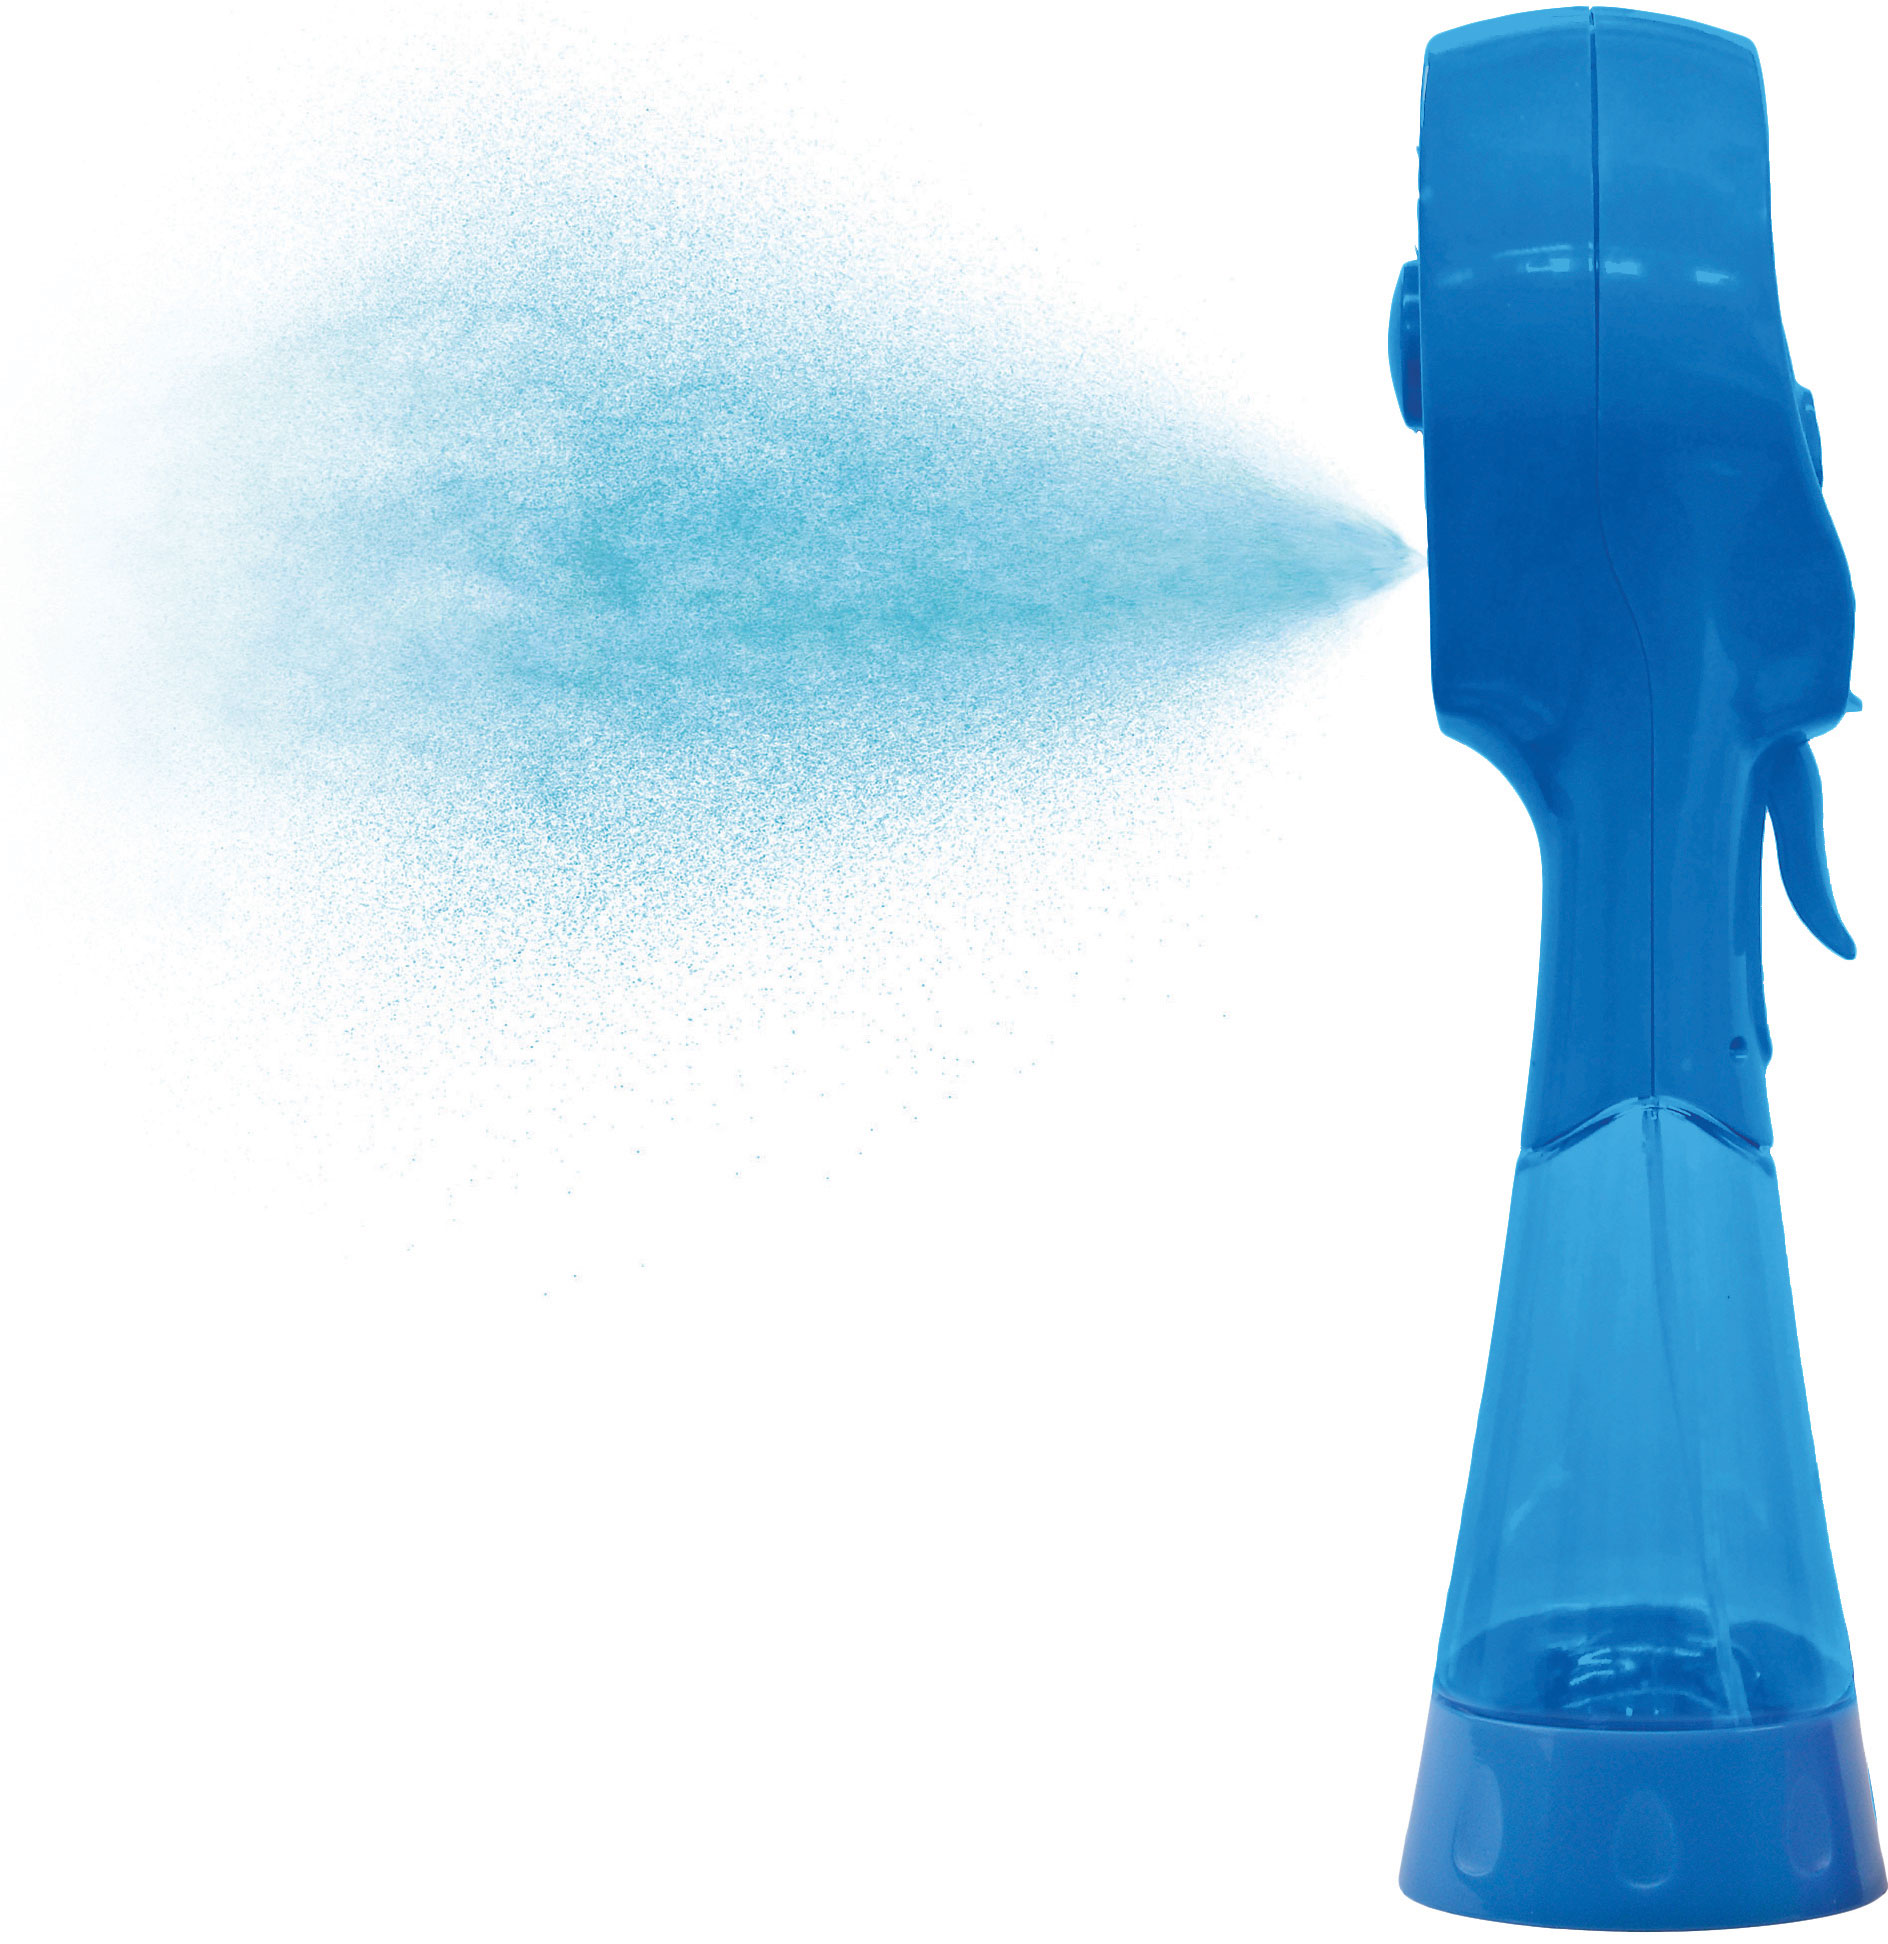 O Cool Battery Operated Handheld Water Misting Fan Spray Cooling Portable Mister EBay